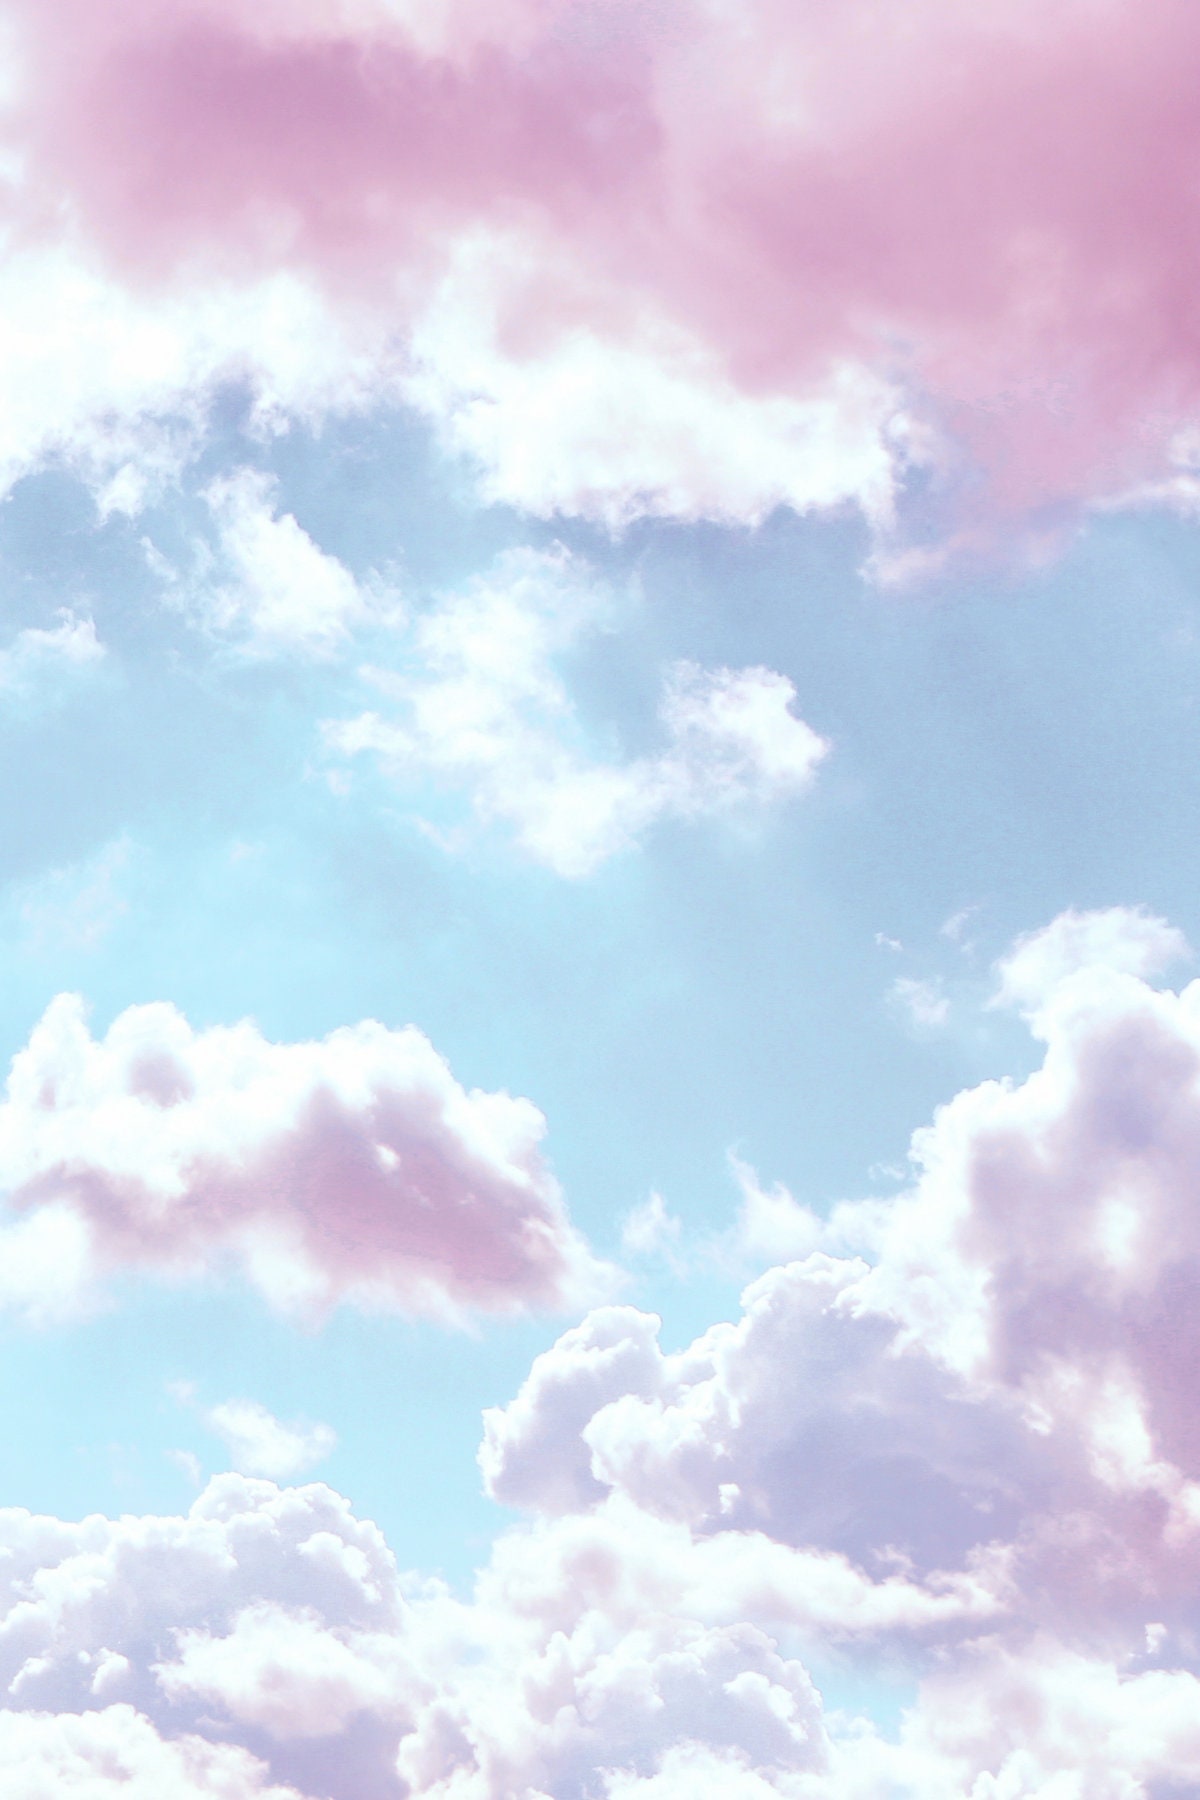 Light Blue And Pink Aesthetic - Artled